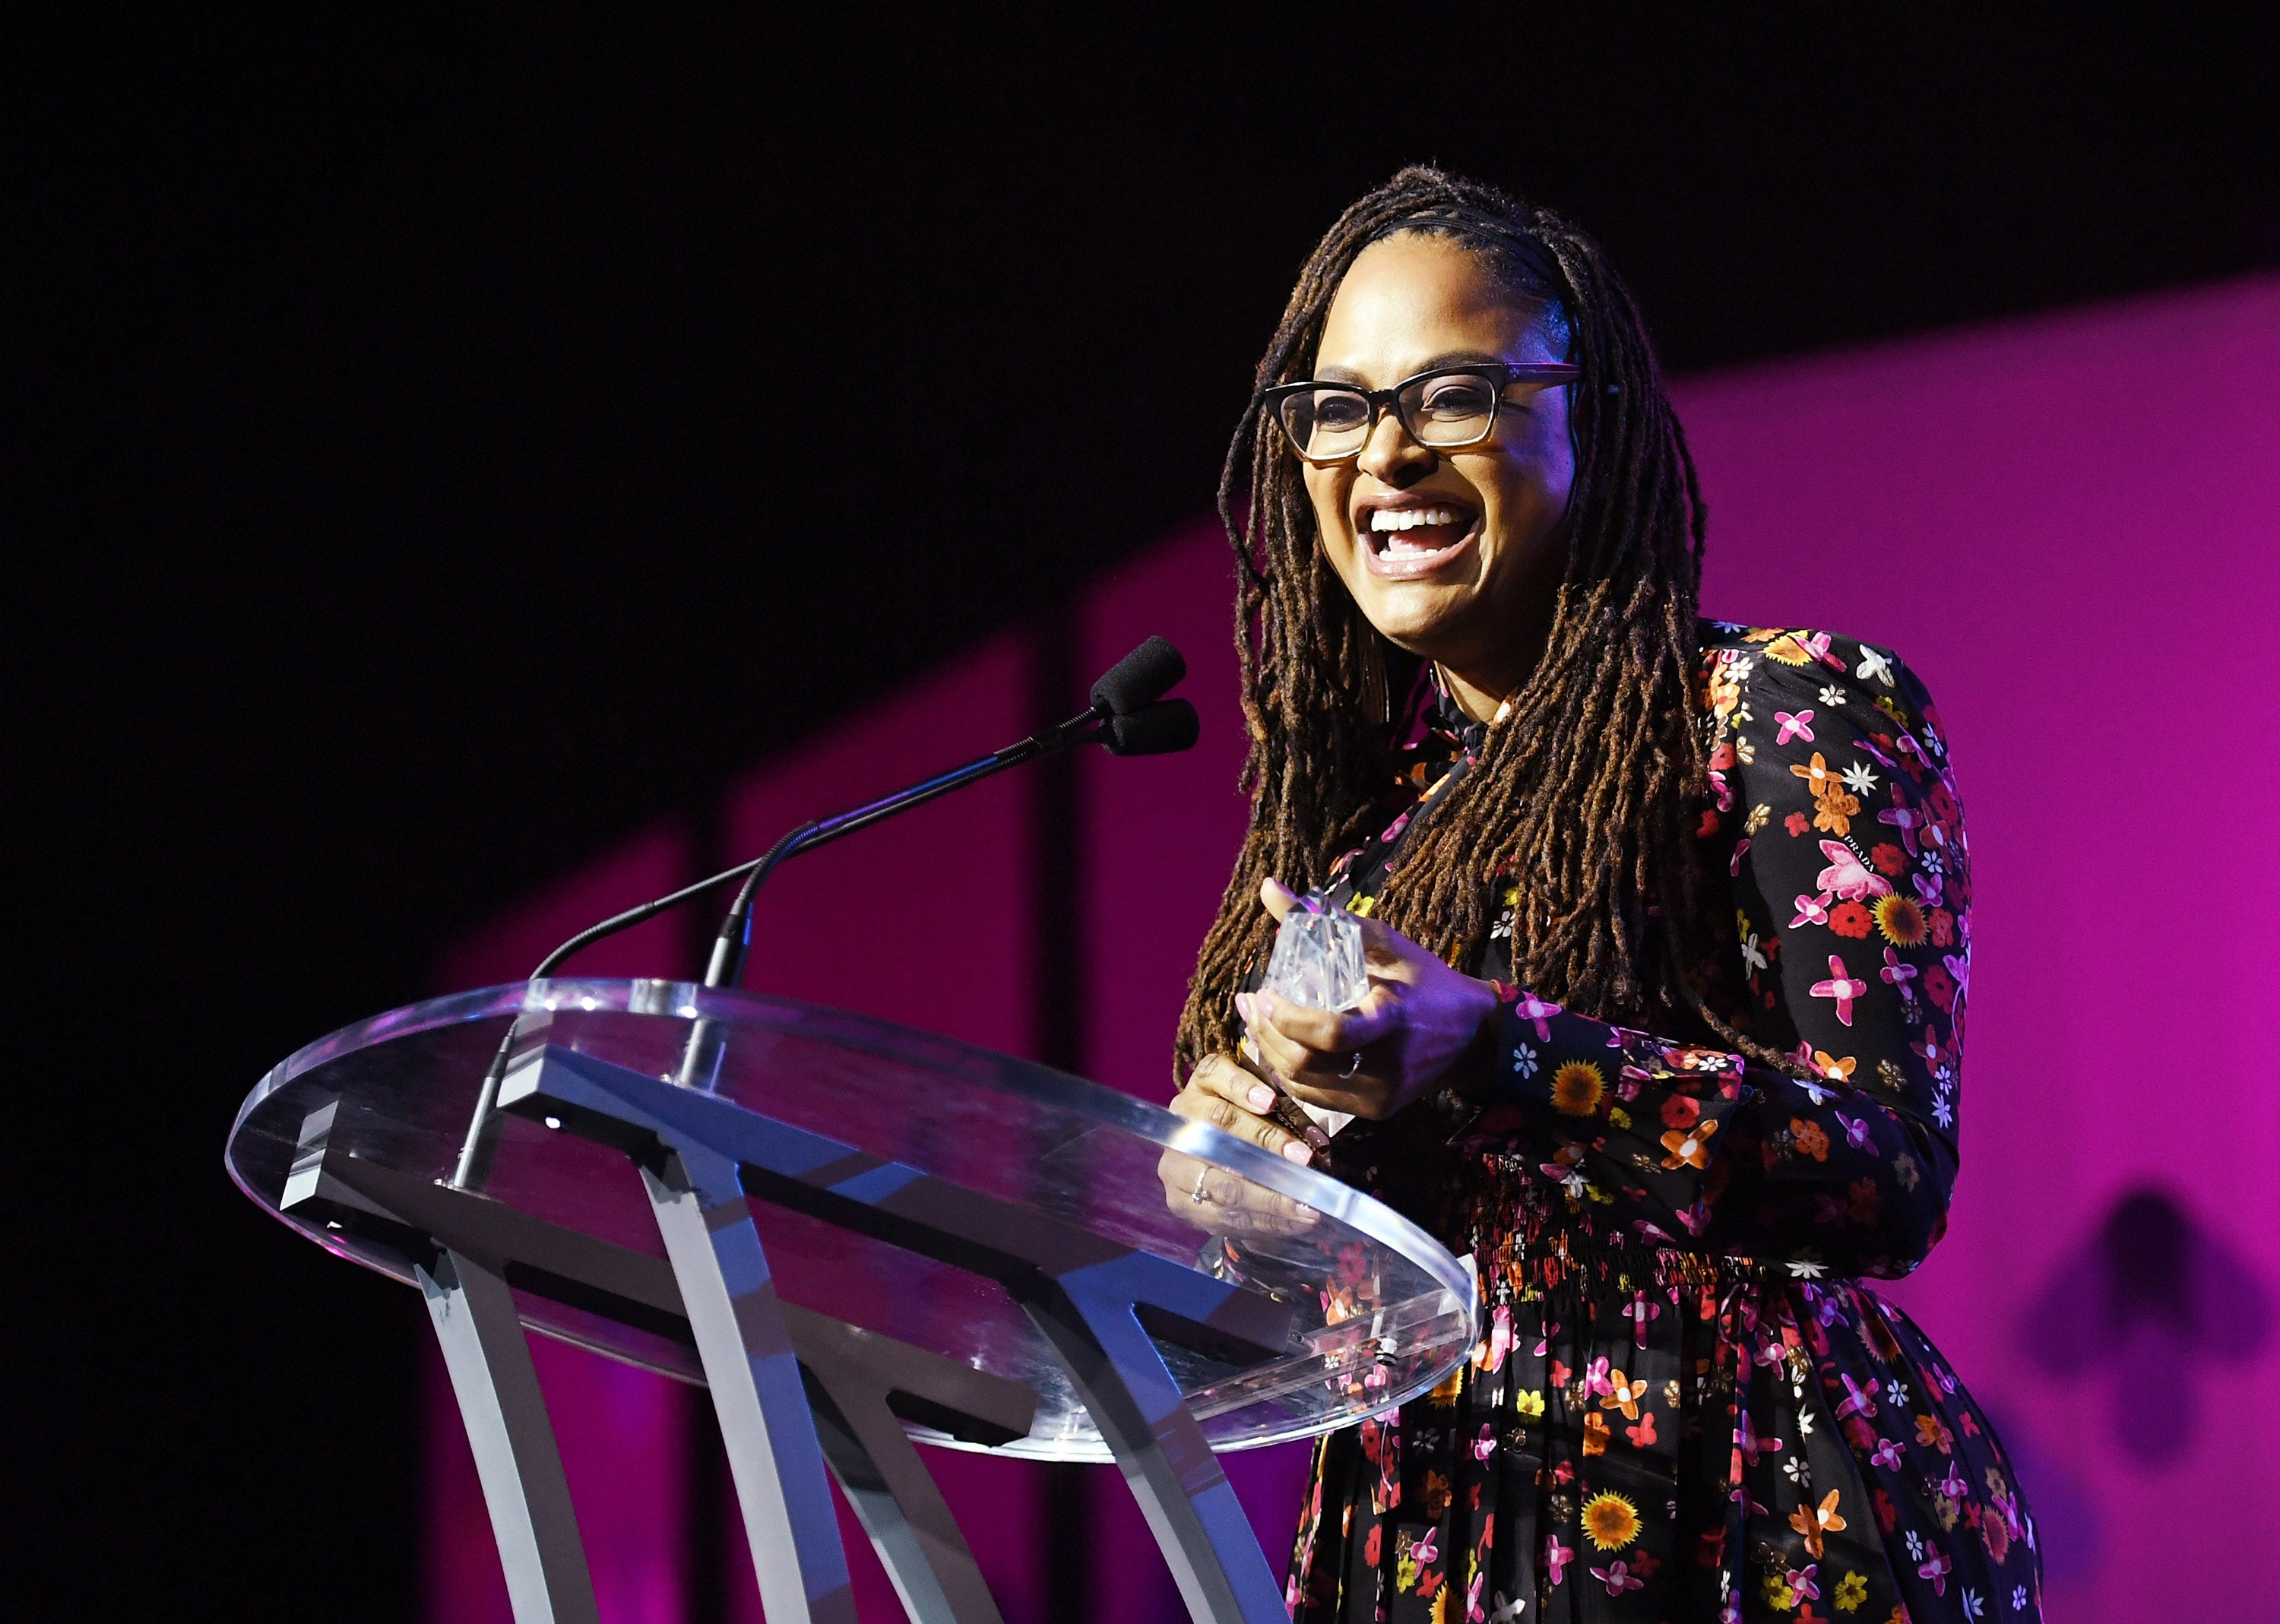 Ava DuVernay Gives A Beautiful And Emotional Definition For 'Woke' In This Speech
